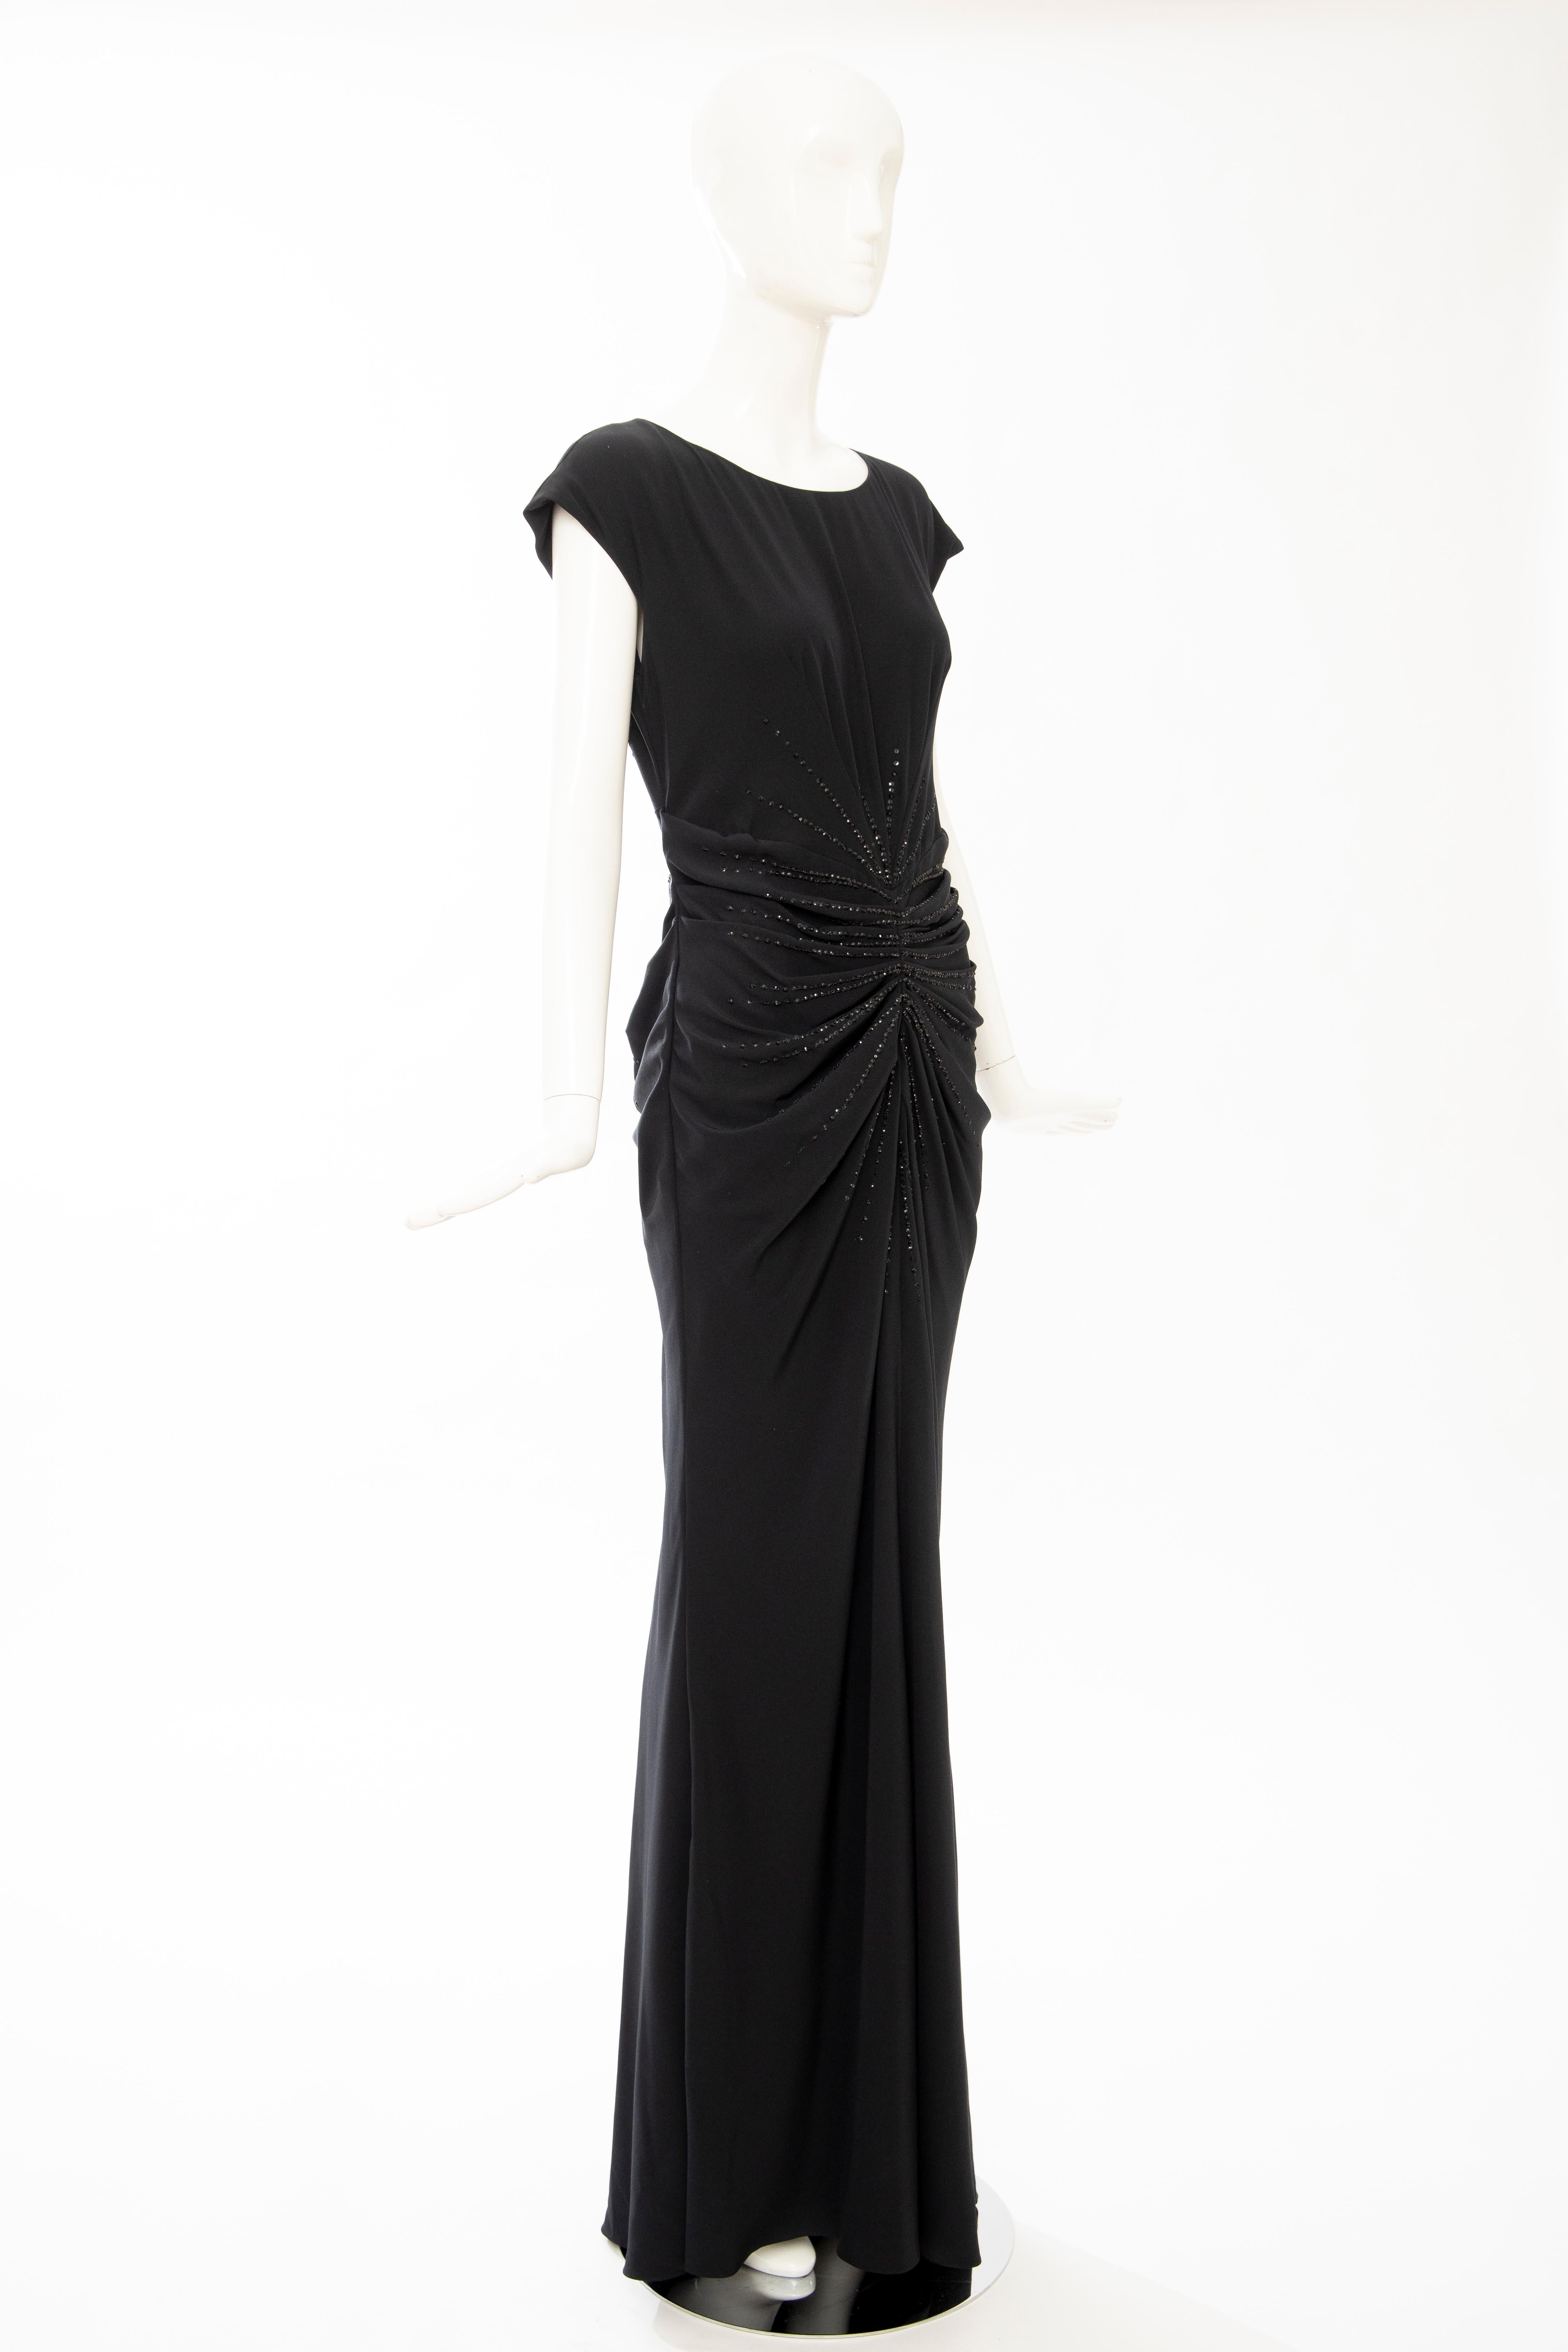 Women's John Galliano for Christian Dior Black Embroidered Evening Dress, Spring 2008